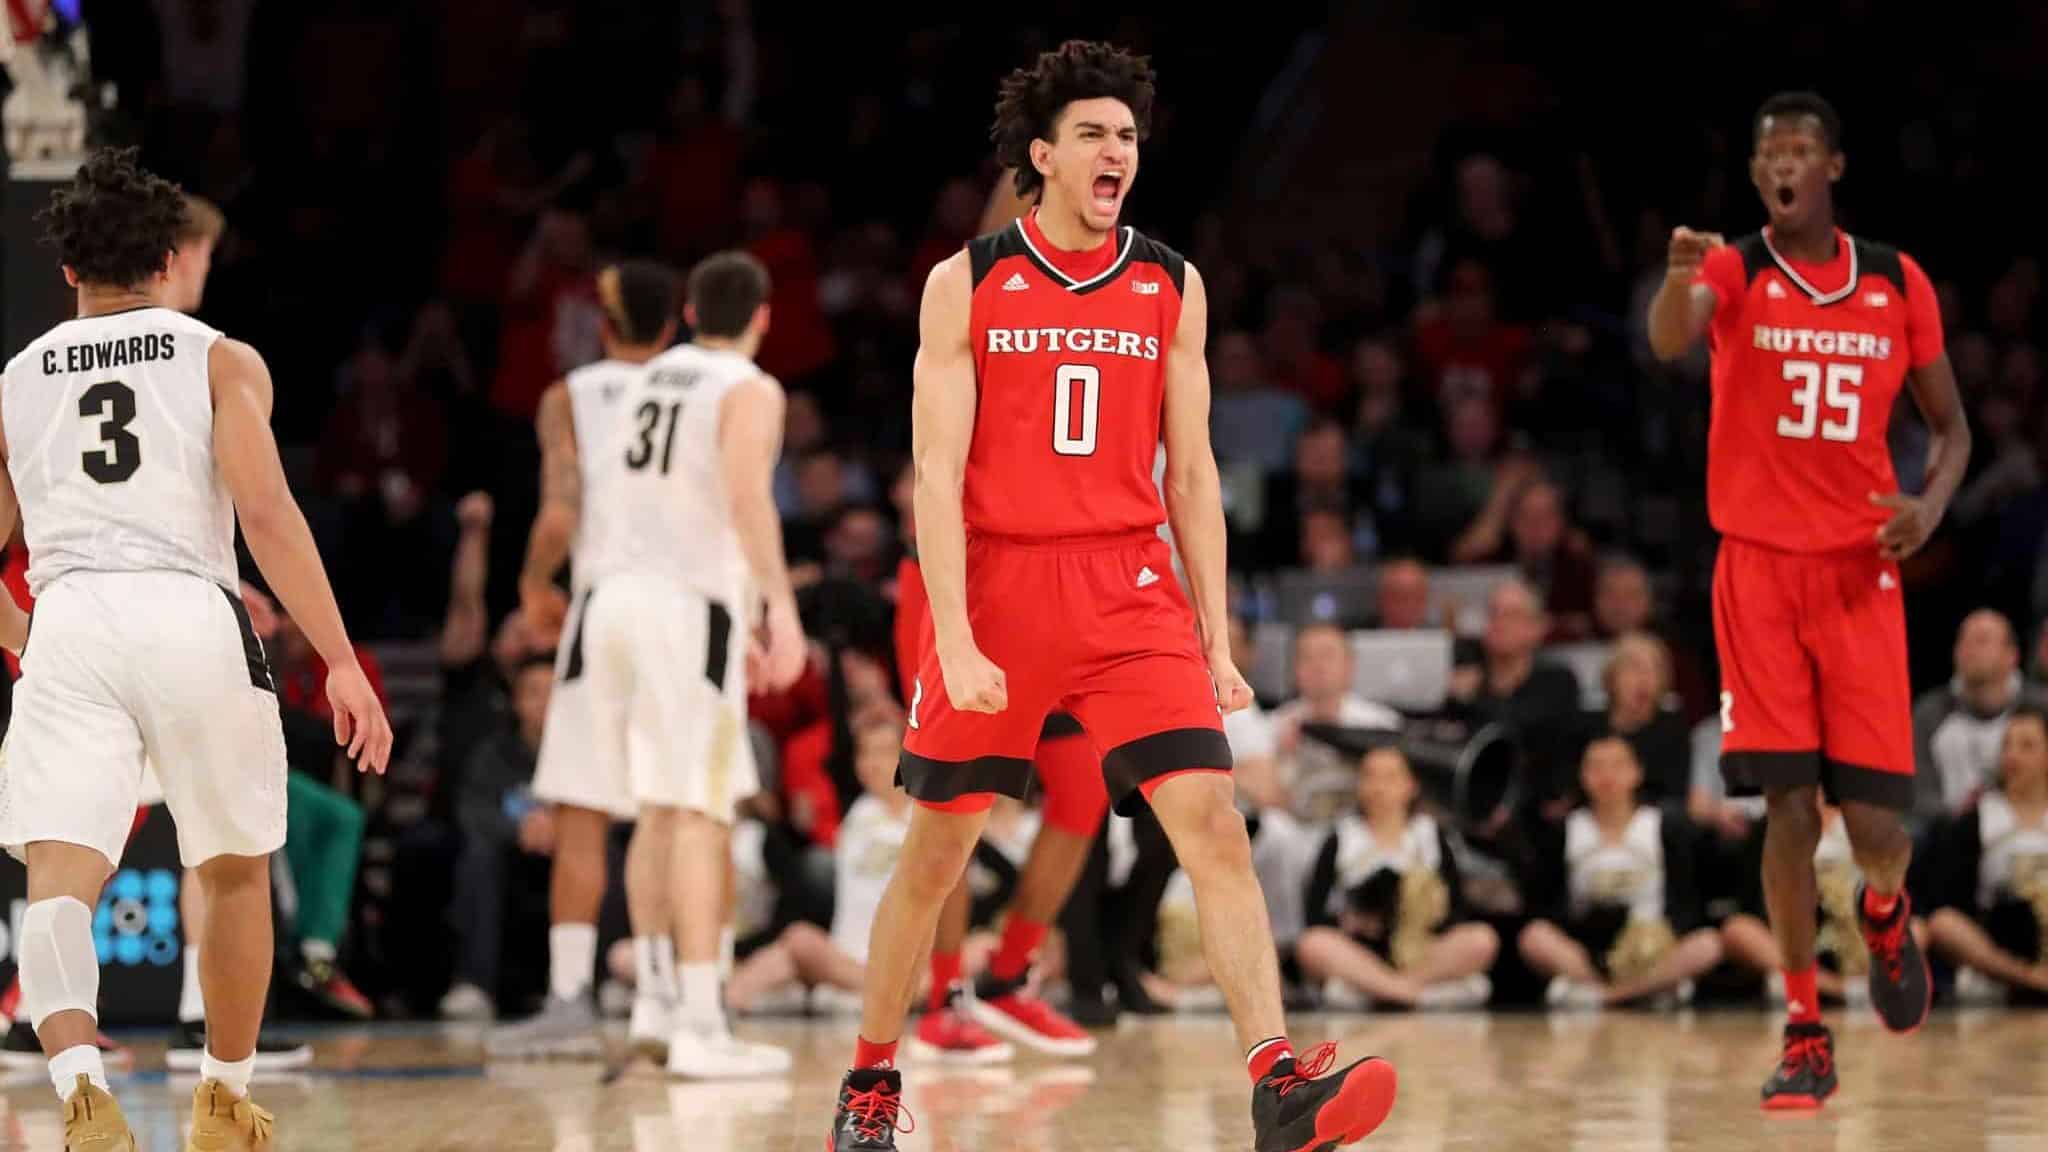 NEW YORK, NY - MARCH 02: Geo Baker #0 of the Rutgers Scarlet Knights reacts in the first half against the Purdue Boilermakers during quarterfinals of the Big Ten Basketball Tournament at Madison Square Garden on March 2, 2018 in New York City.